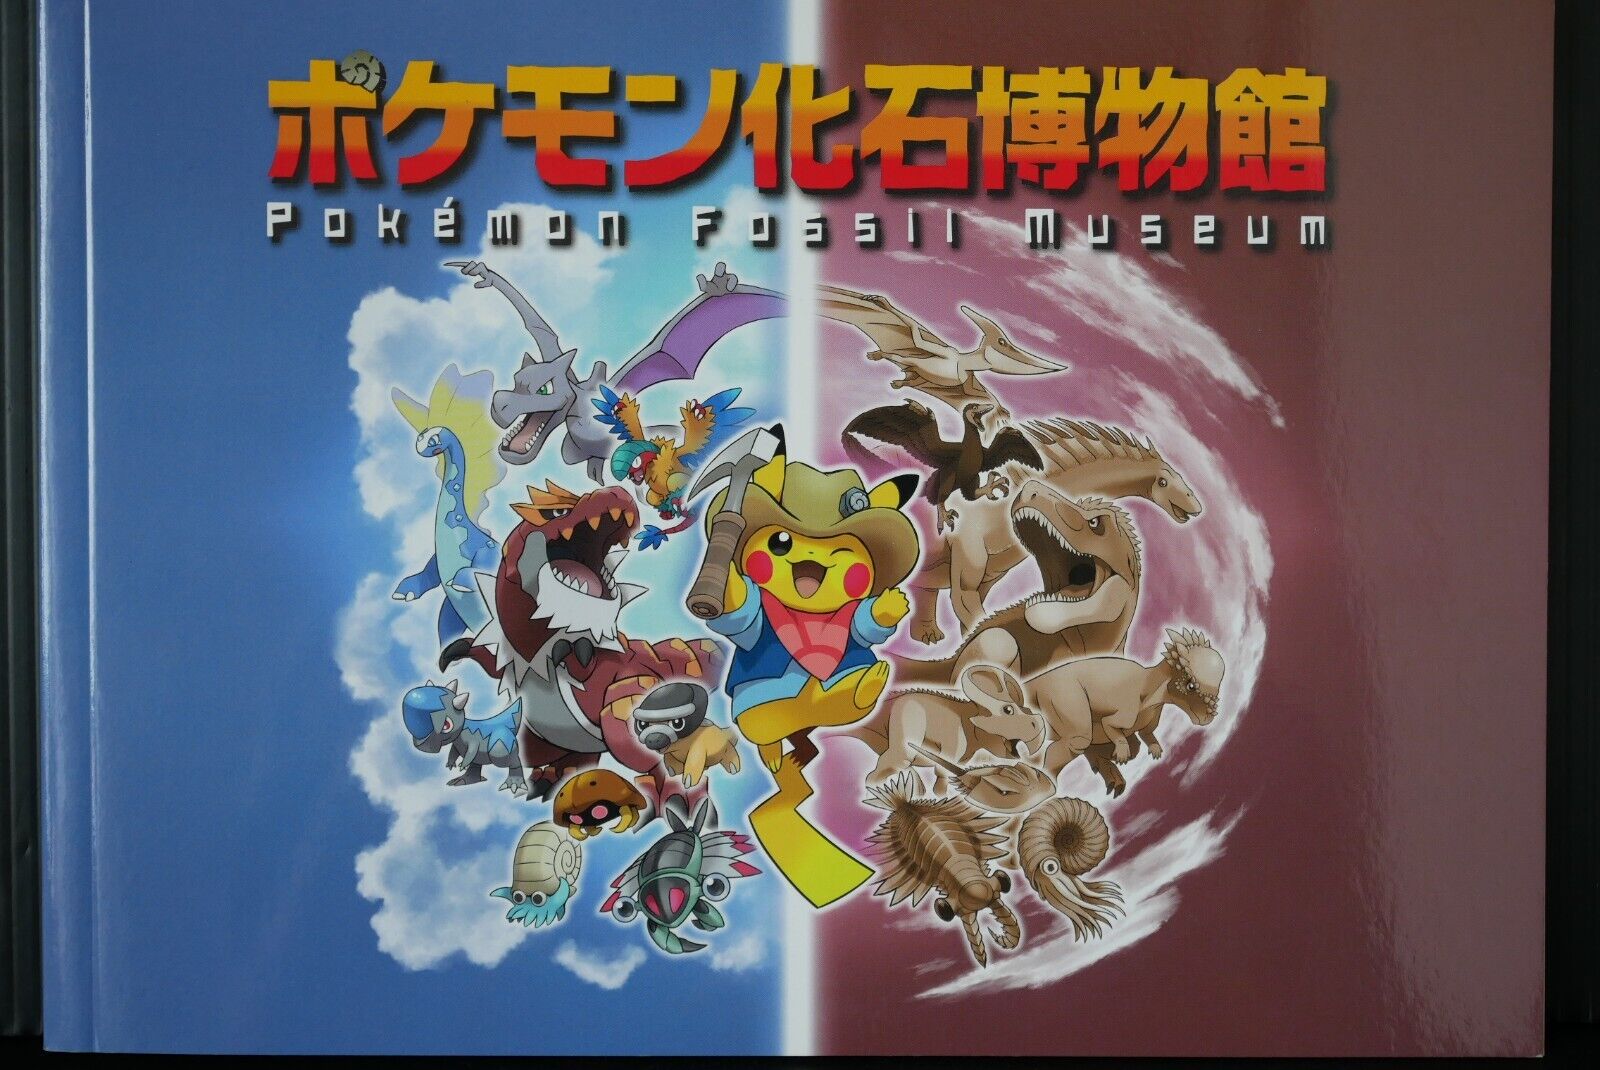 Pokemon Fossil Museum Pictorial Record Catalogue (Book) from JAPAN